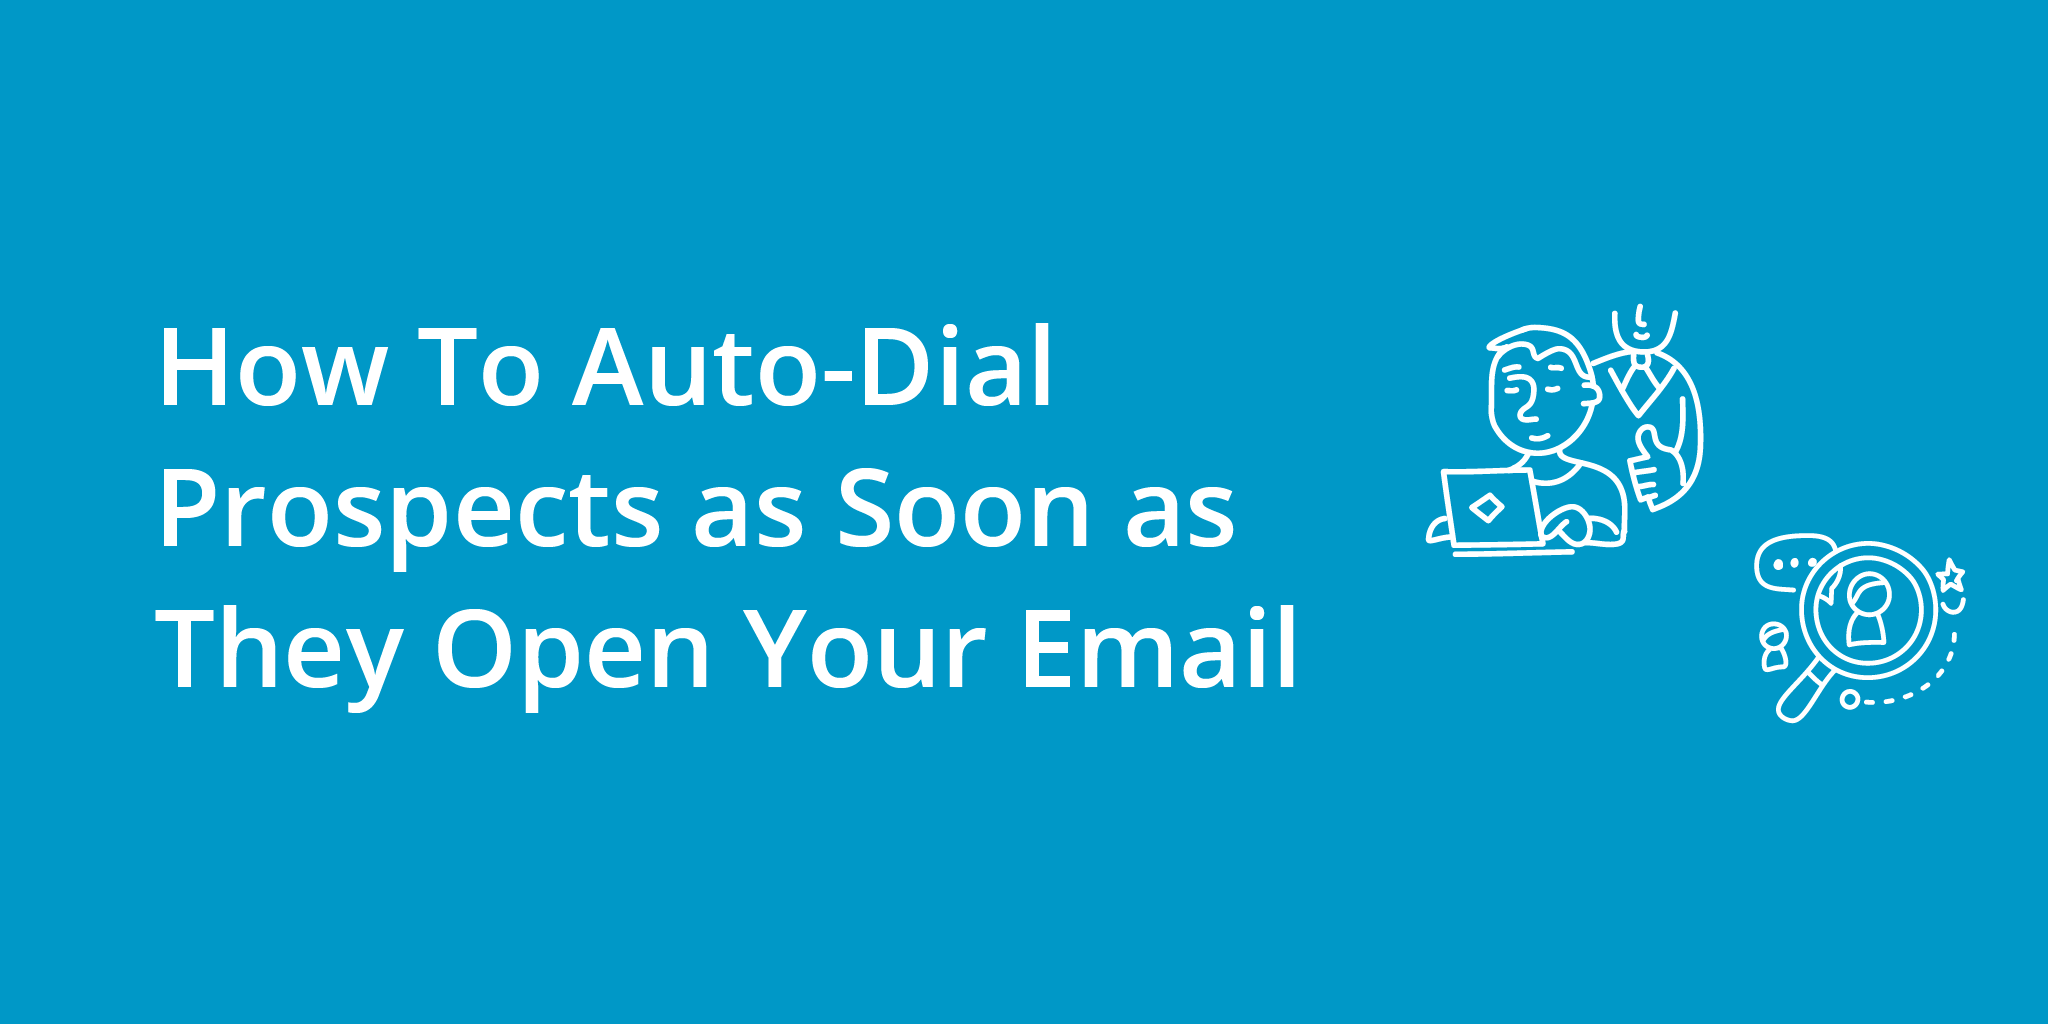 How To Auto-Dial Prospects as Soon as They Open Your Email | Telephones for business